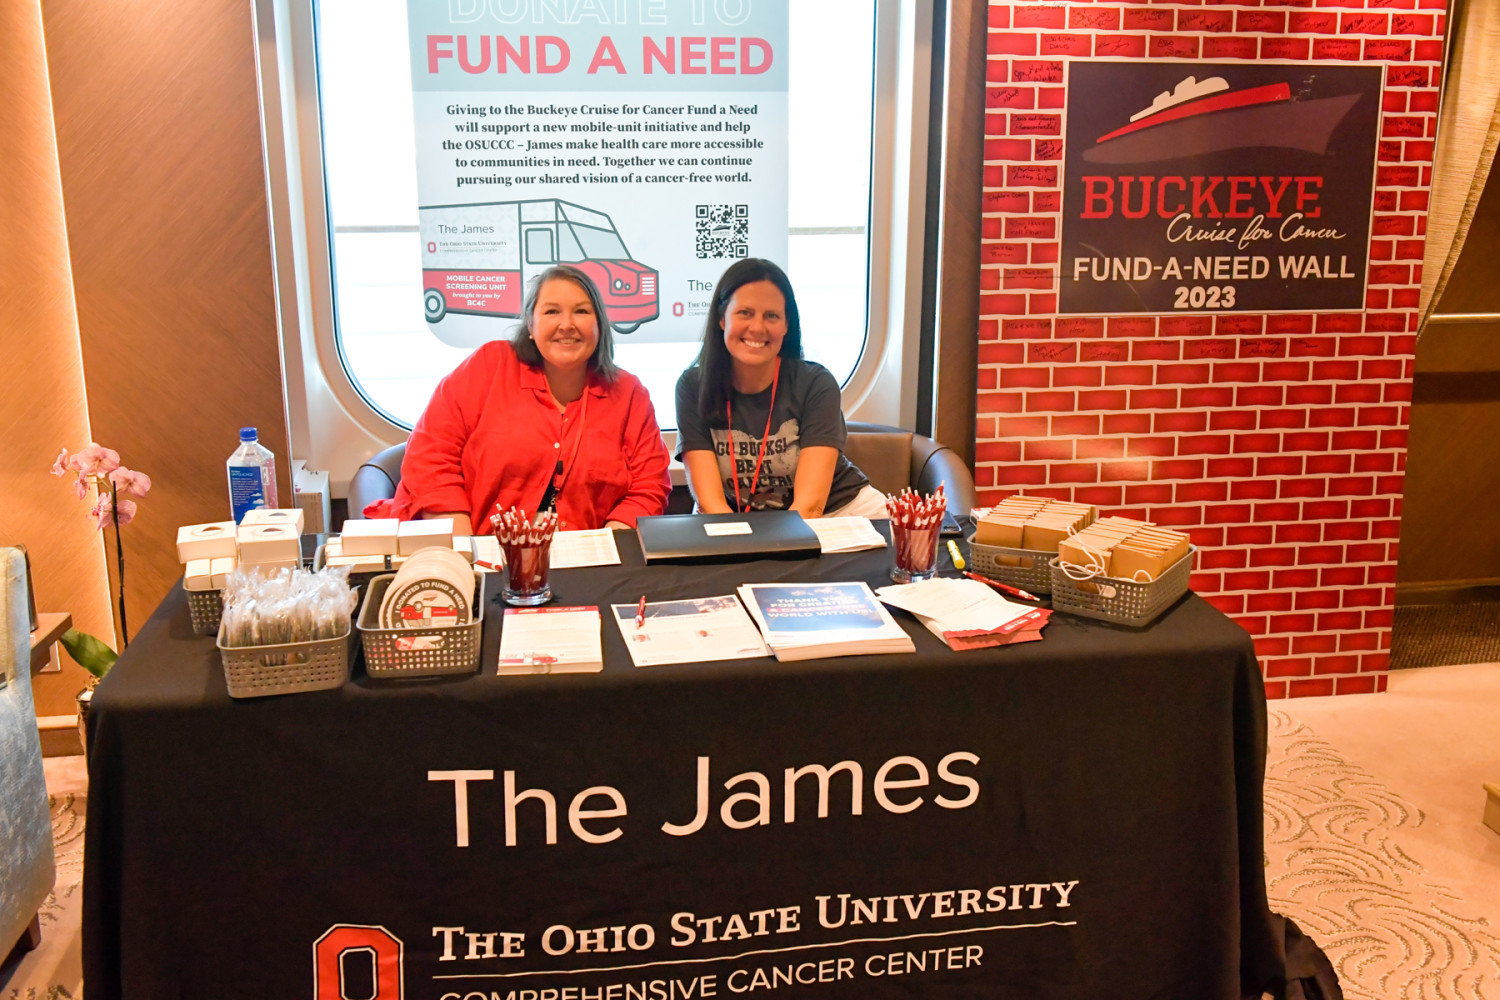 We do this all for the OSUCCC - James, changing lives for the better every day!